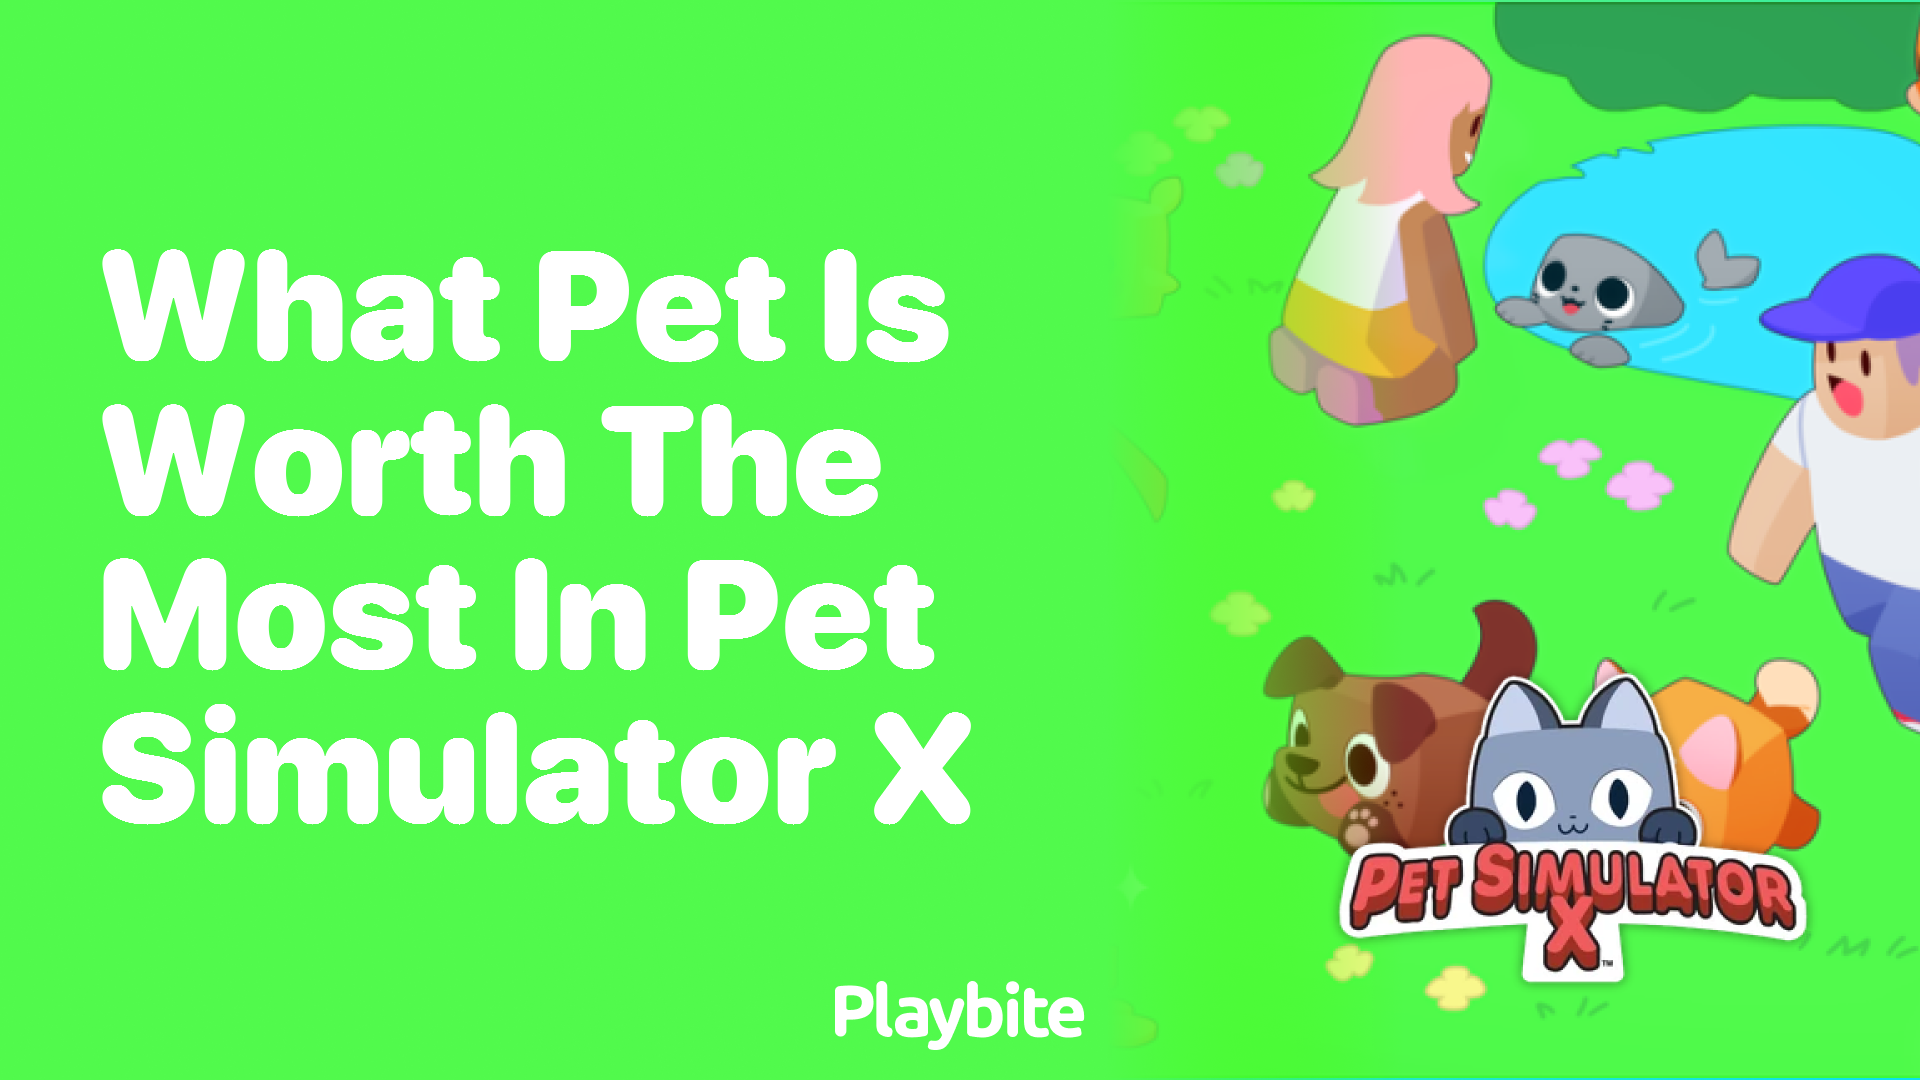 Discover the Most Valuable Pet in Pet Simulator X